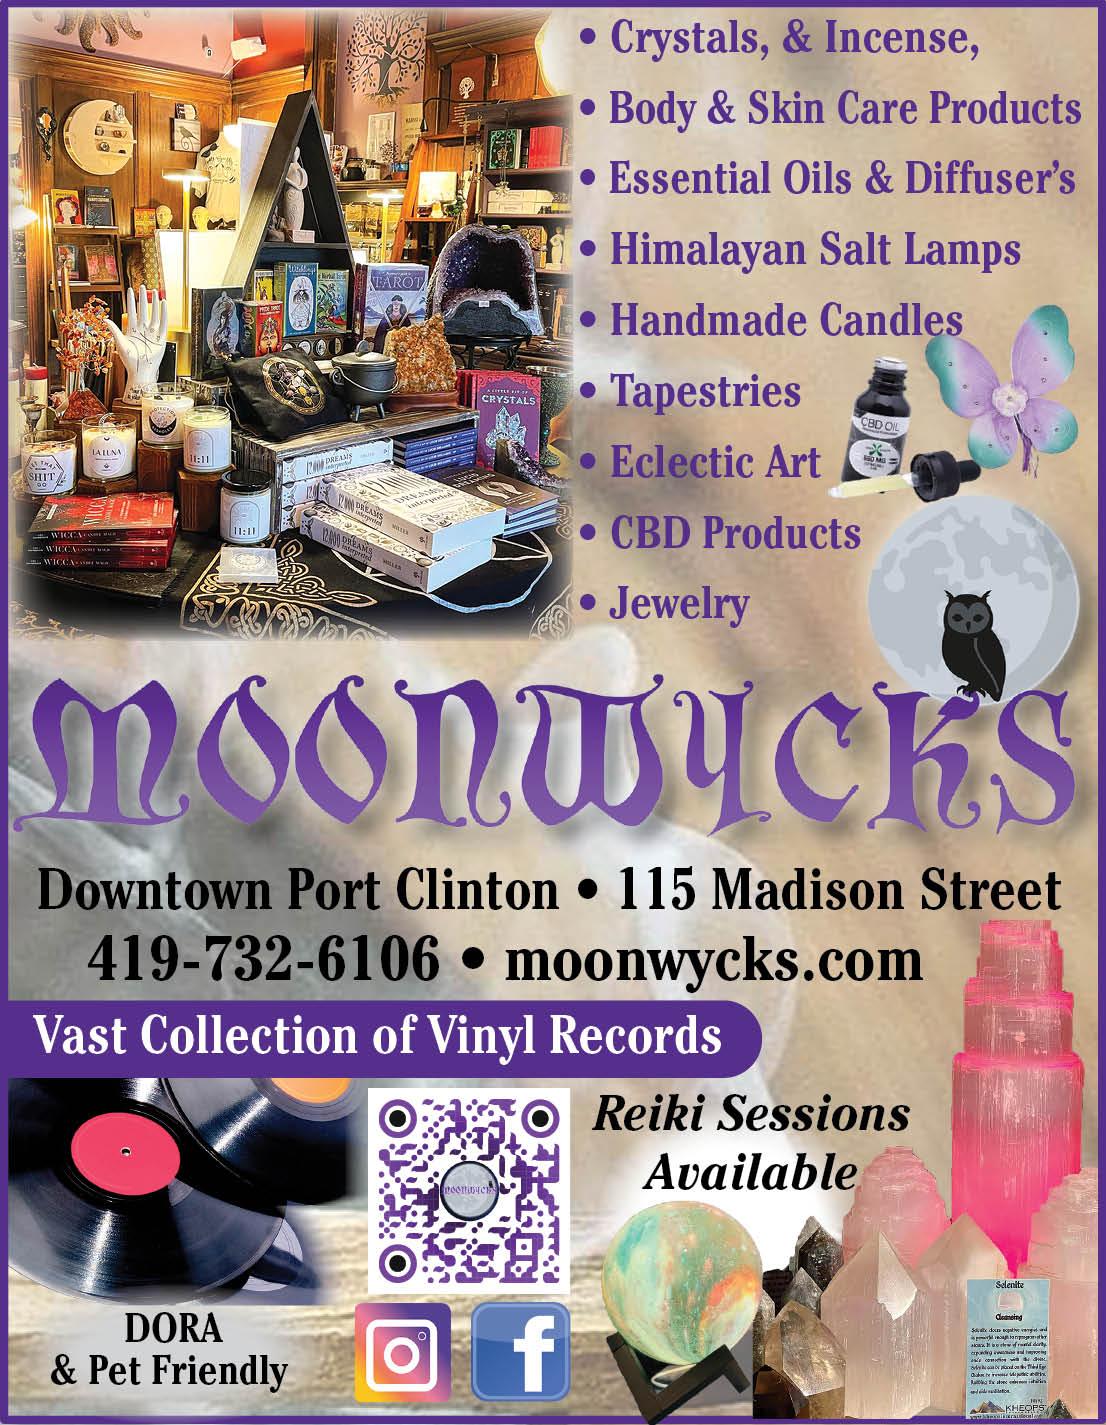 Moonwyck’s New Age Gift Shoppe